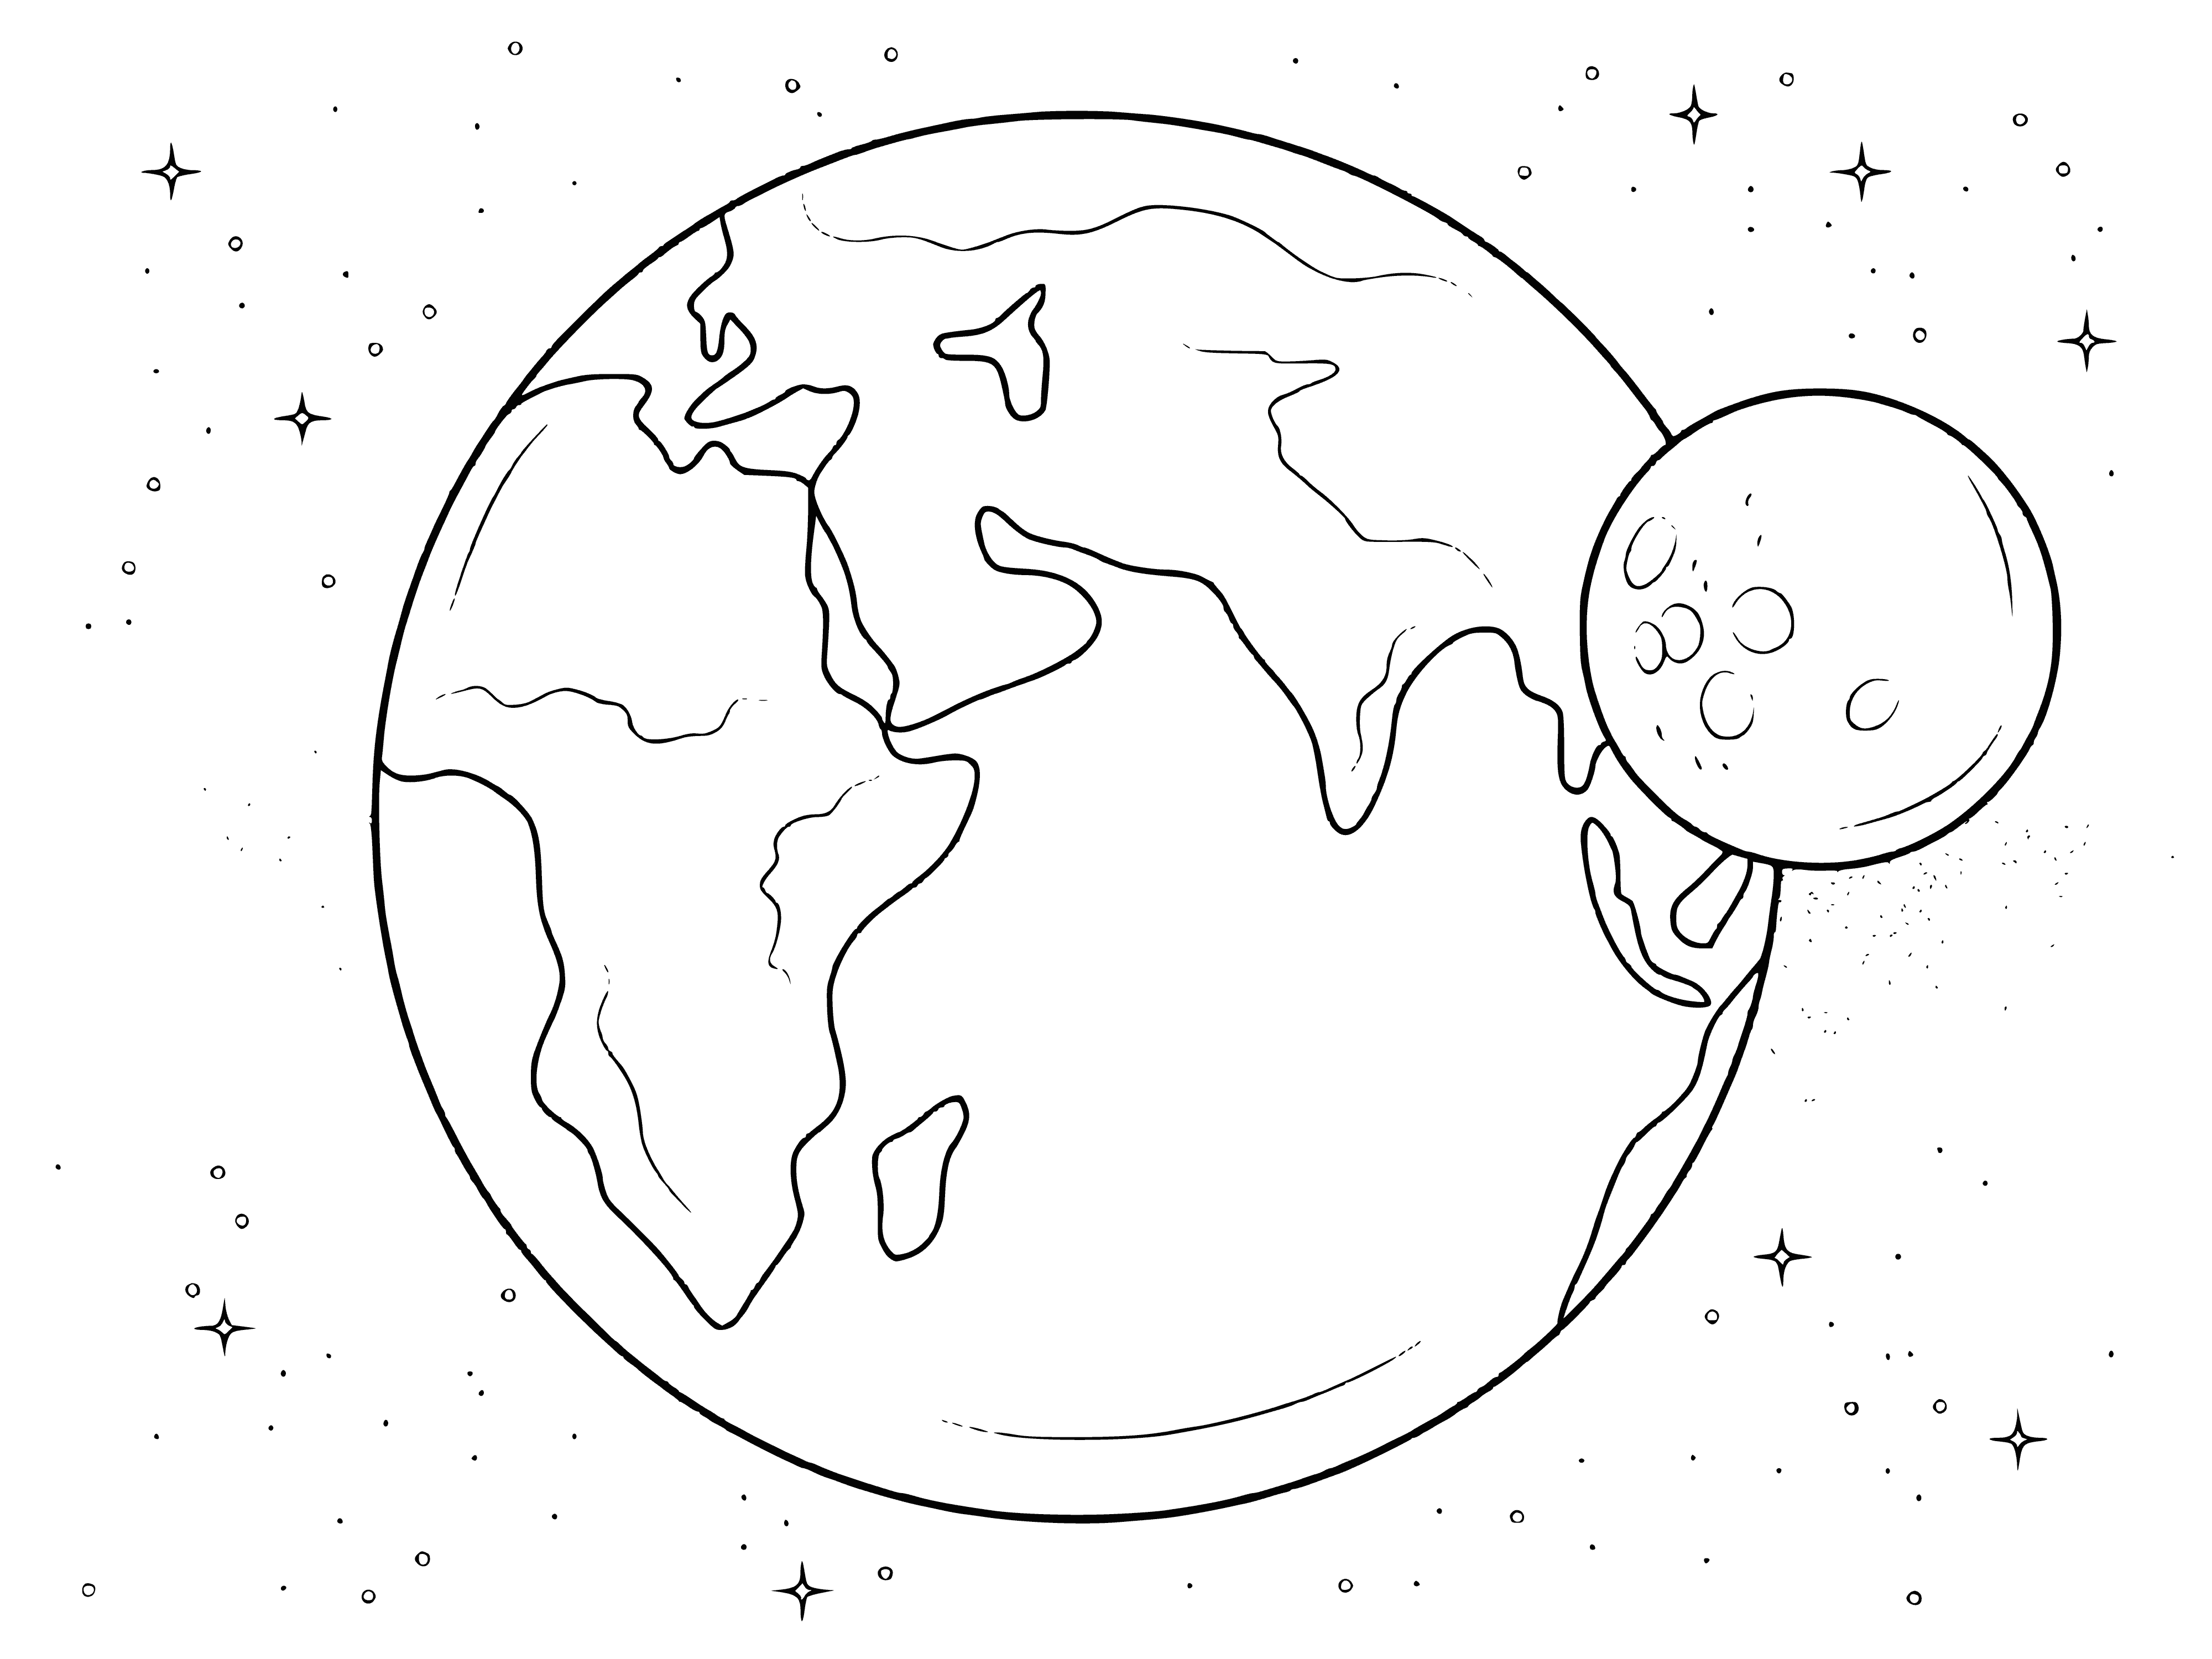 coloring page: Earth seen from space: blue & white sphere w/ swirls of clouds, land masses green & brown, oceans blue, surrounded by a black void.